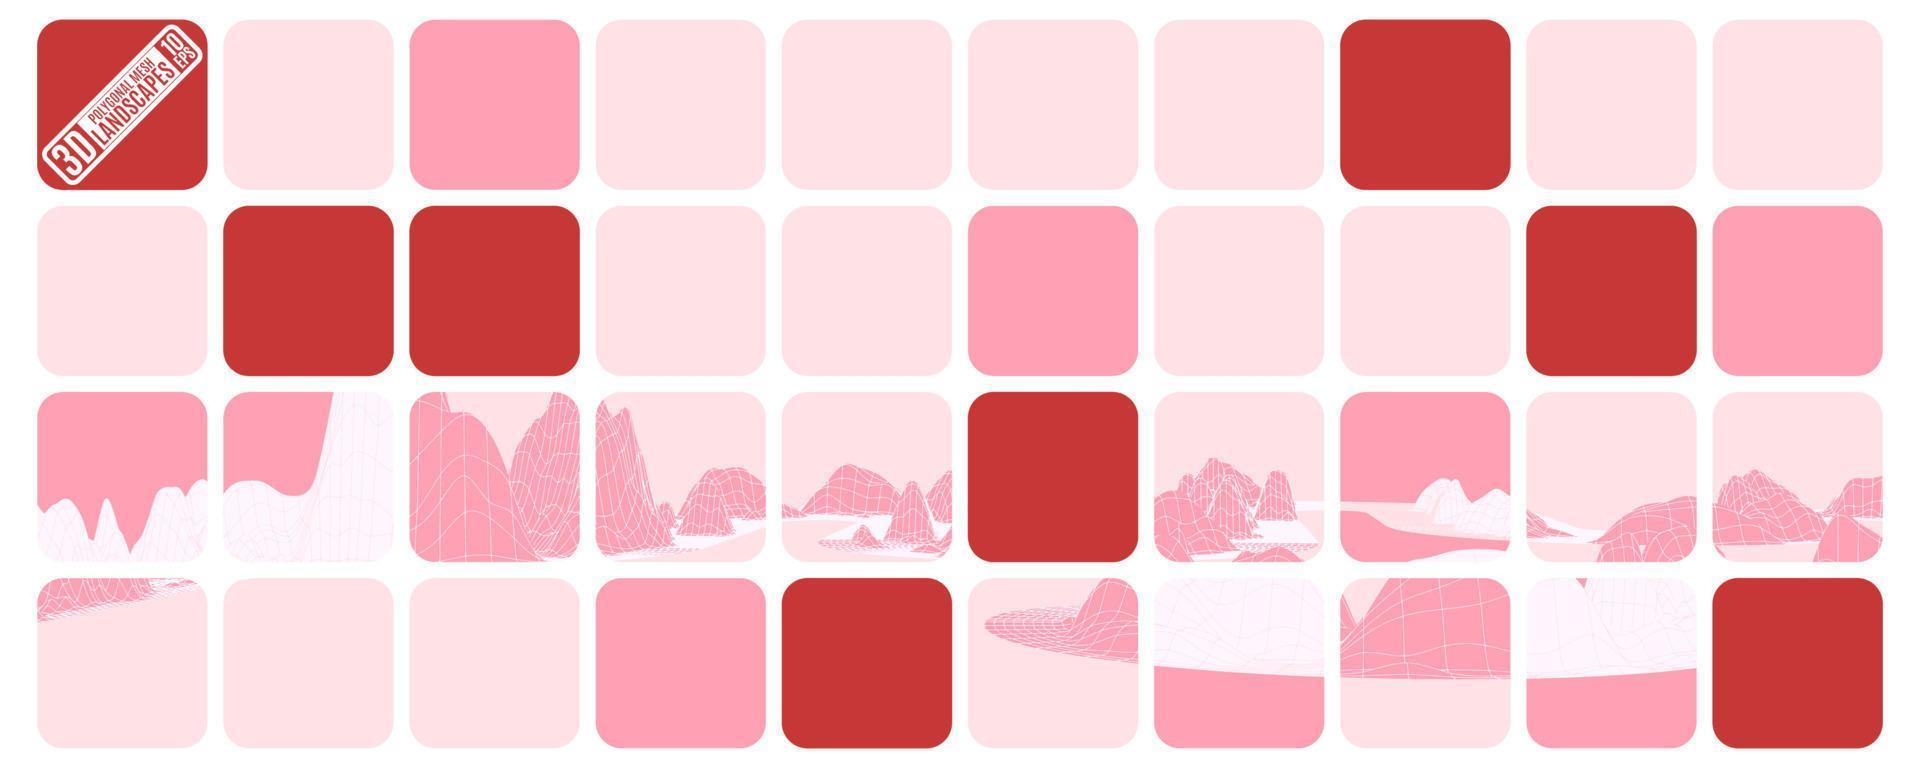 pink mosaic cubes of red and white with polygonal mountains vector